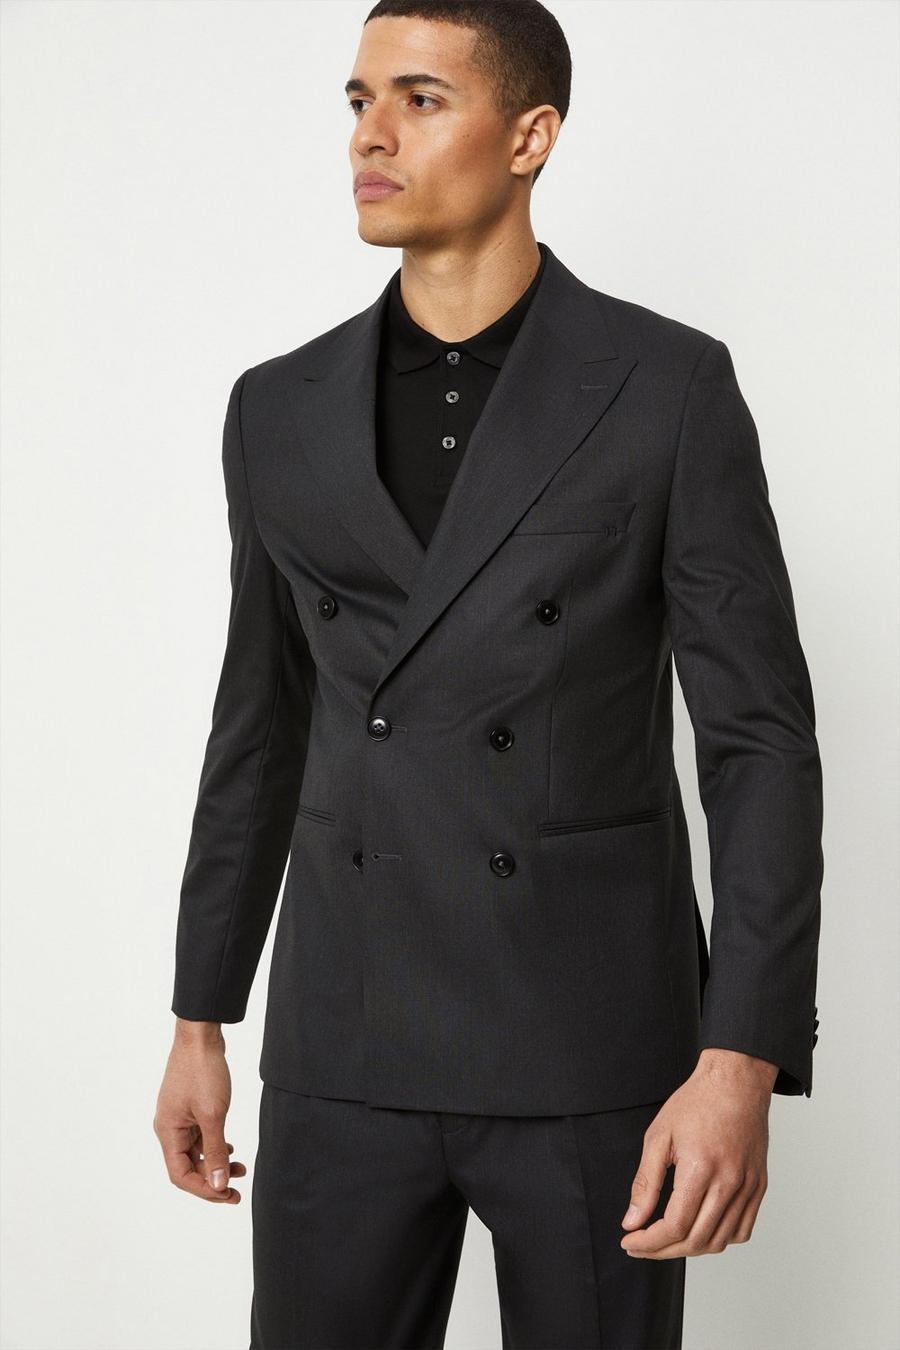 1904 Slim Fit Charcoal Double Breasted Peak Lapel Jacket